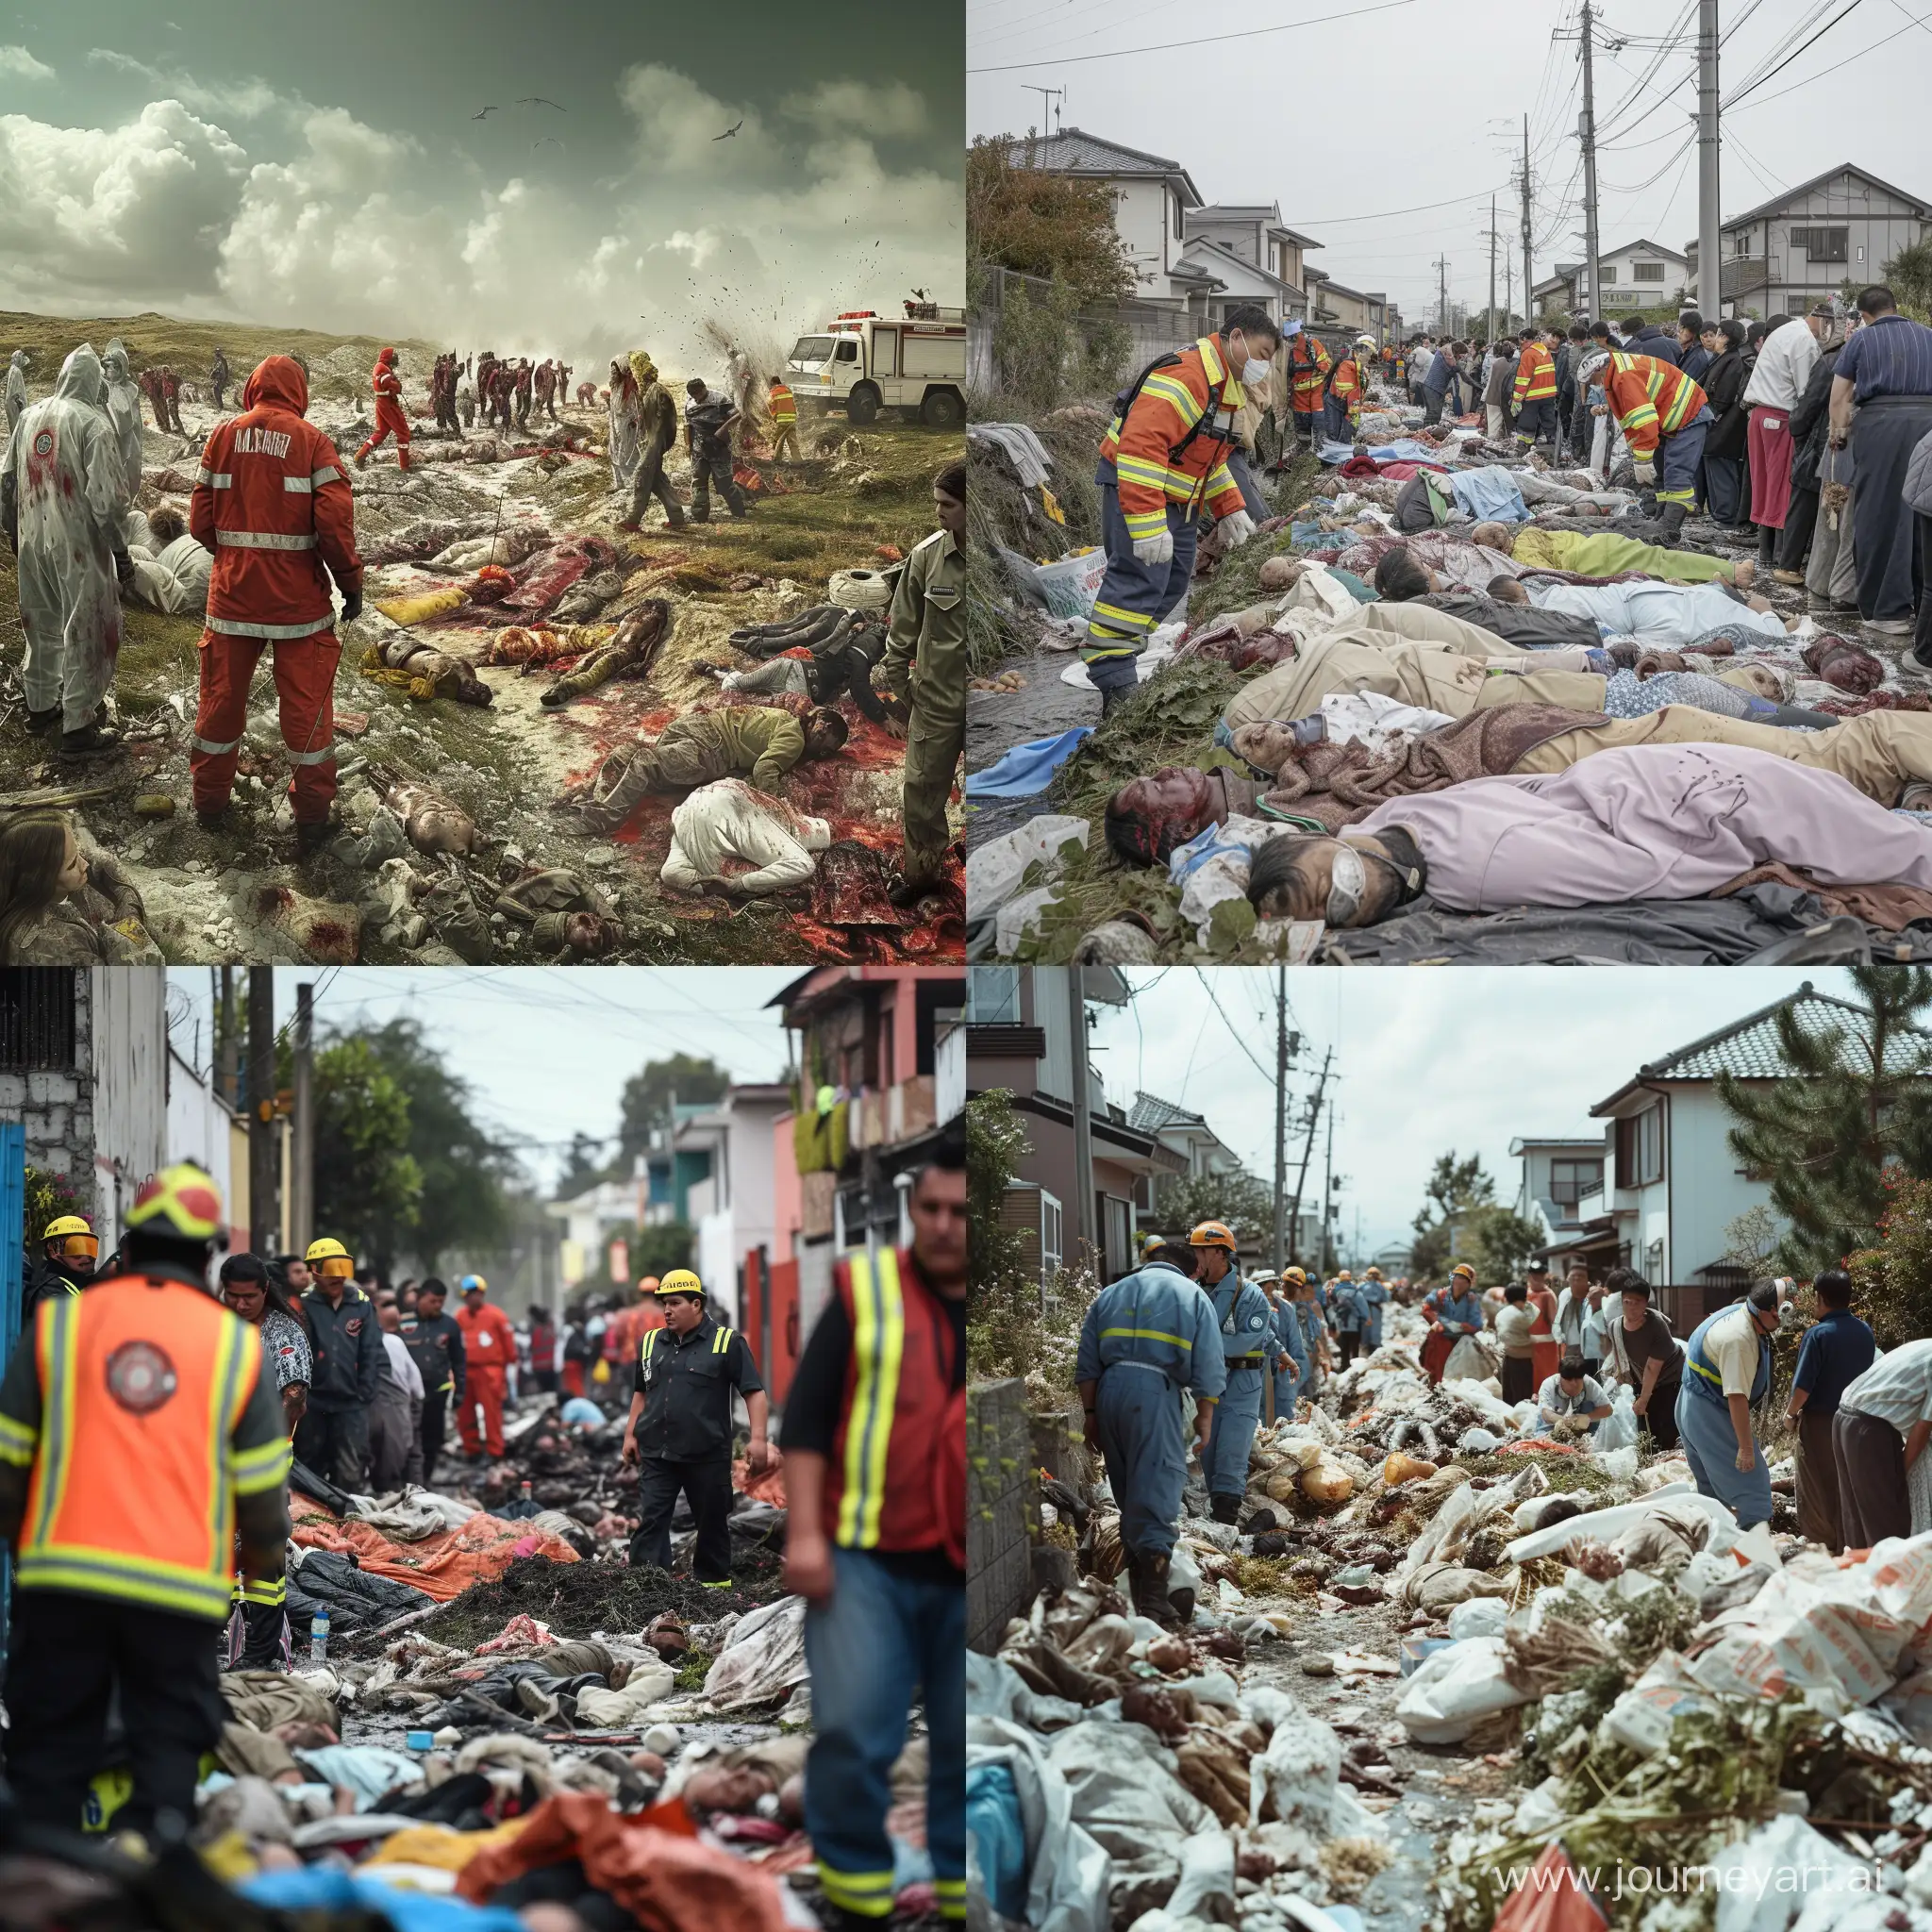 Rescue-Operations-and-Community-Response-in-the-Aftermath-of-a-Major-Disaster